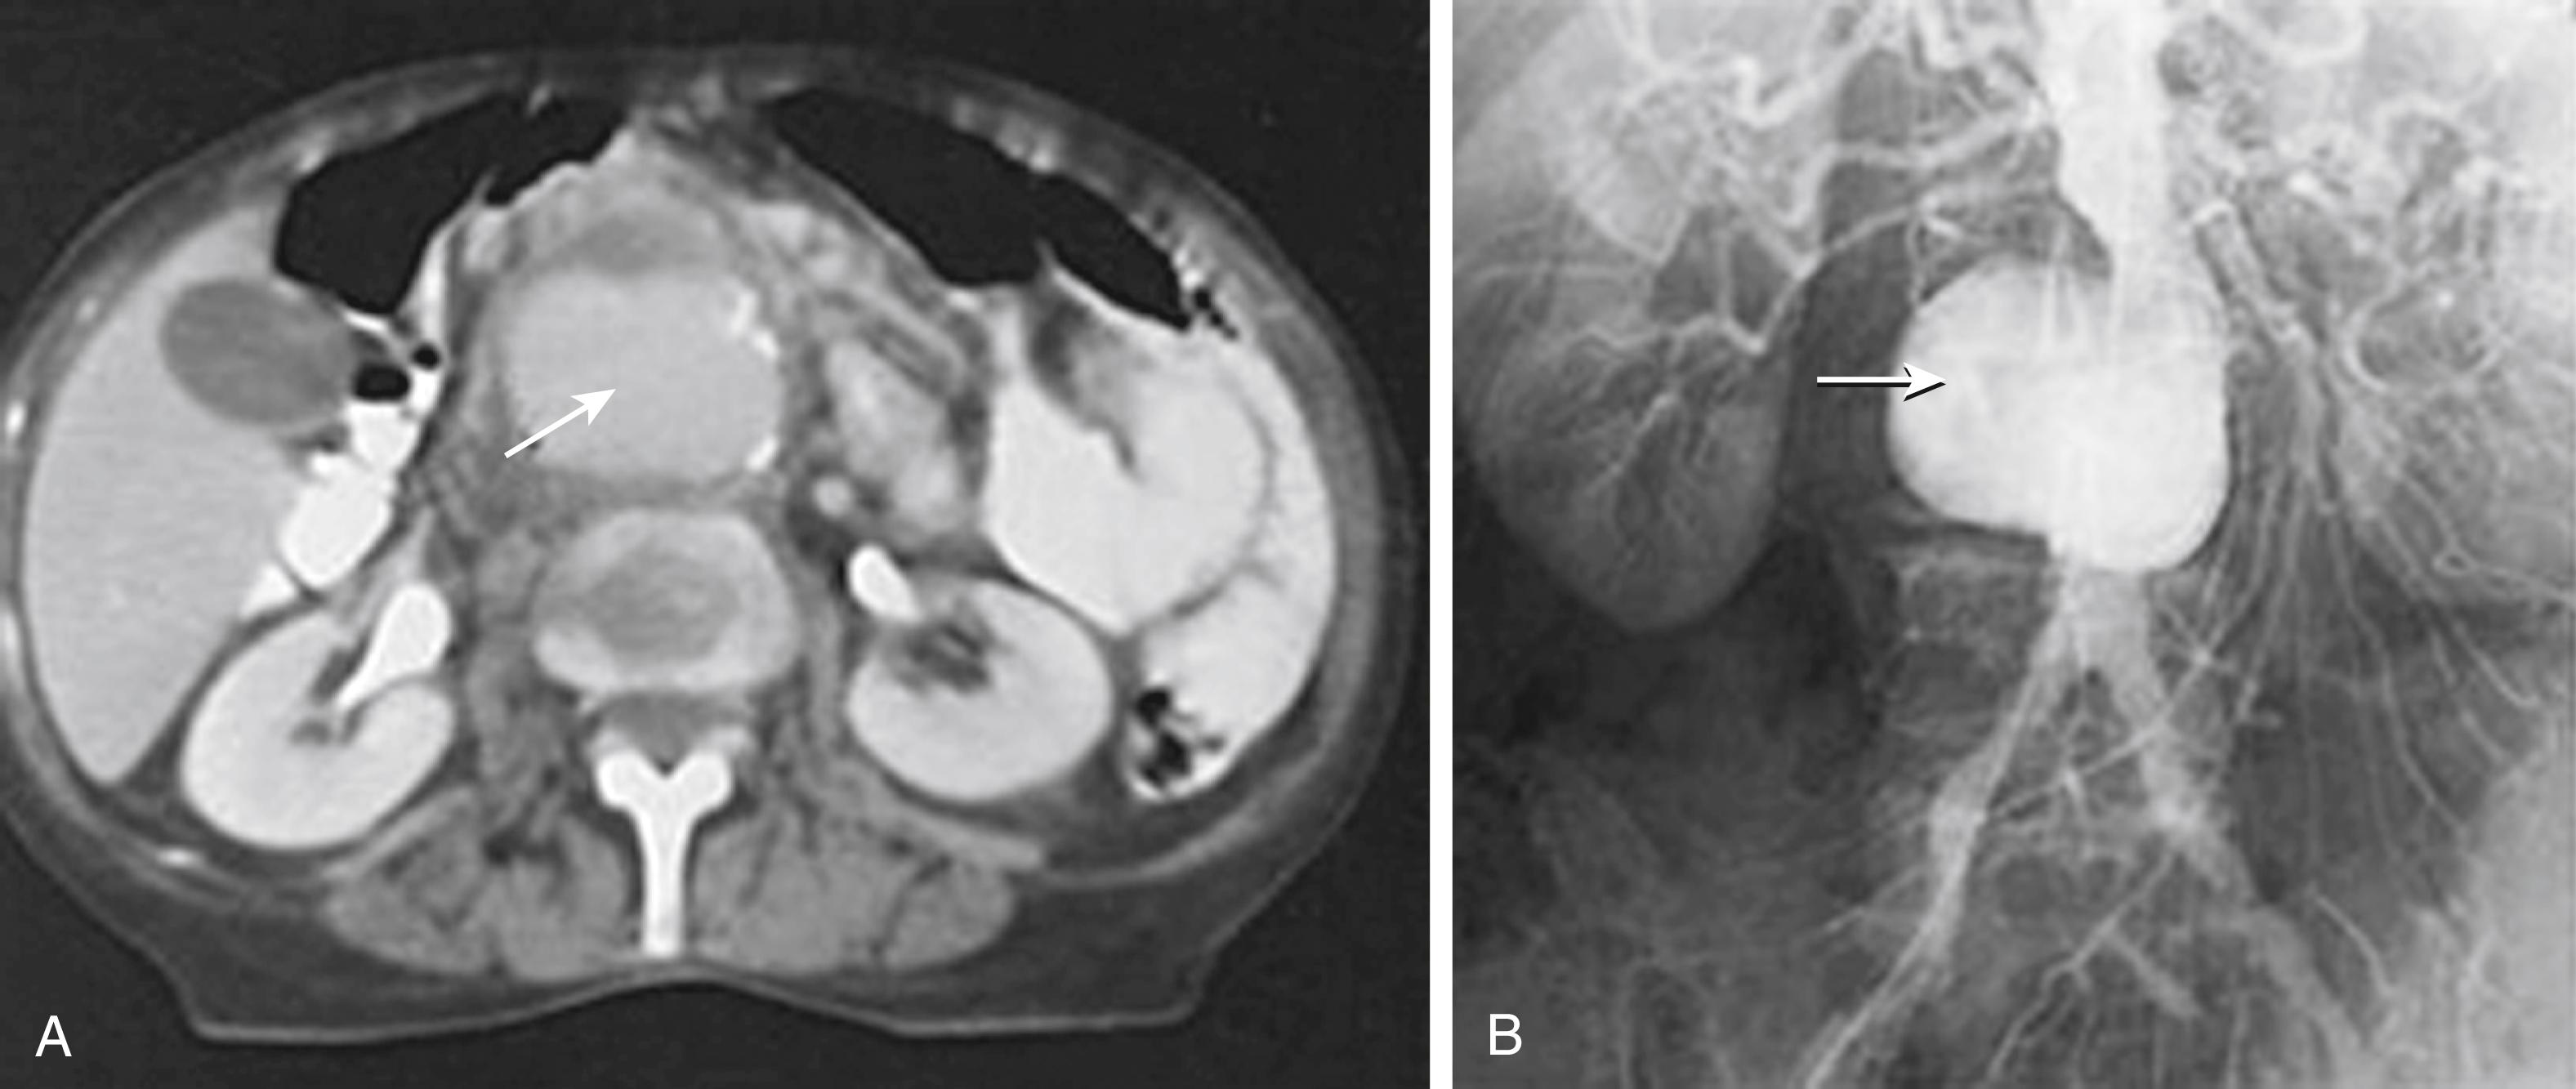 Figure 145.2, Diagnostic radiology studies of a patient with Salmonella infection of a preexisting small atherosclerotic aneurysm. ( A ) Contrast-enhanced computed tomography scan showing a saccular aneurysm with calcification (arrow) . ( B ) Transfemoral aortogram showing a saccular atherosclerotic infrarenal aneurysm (arrow) .